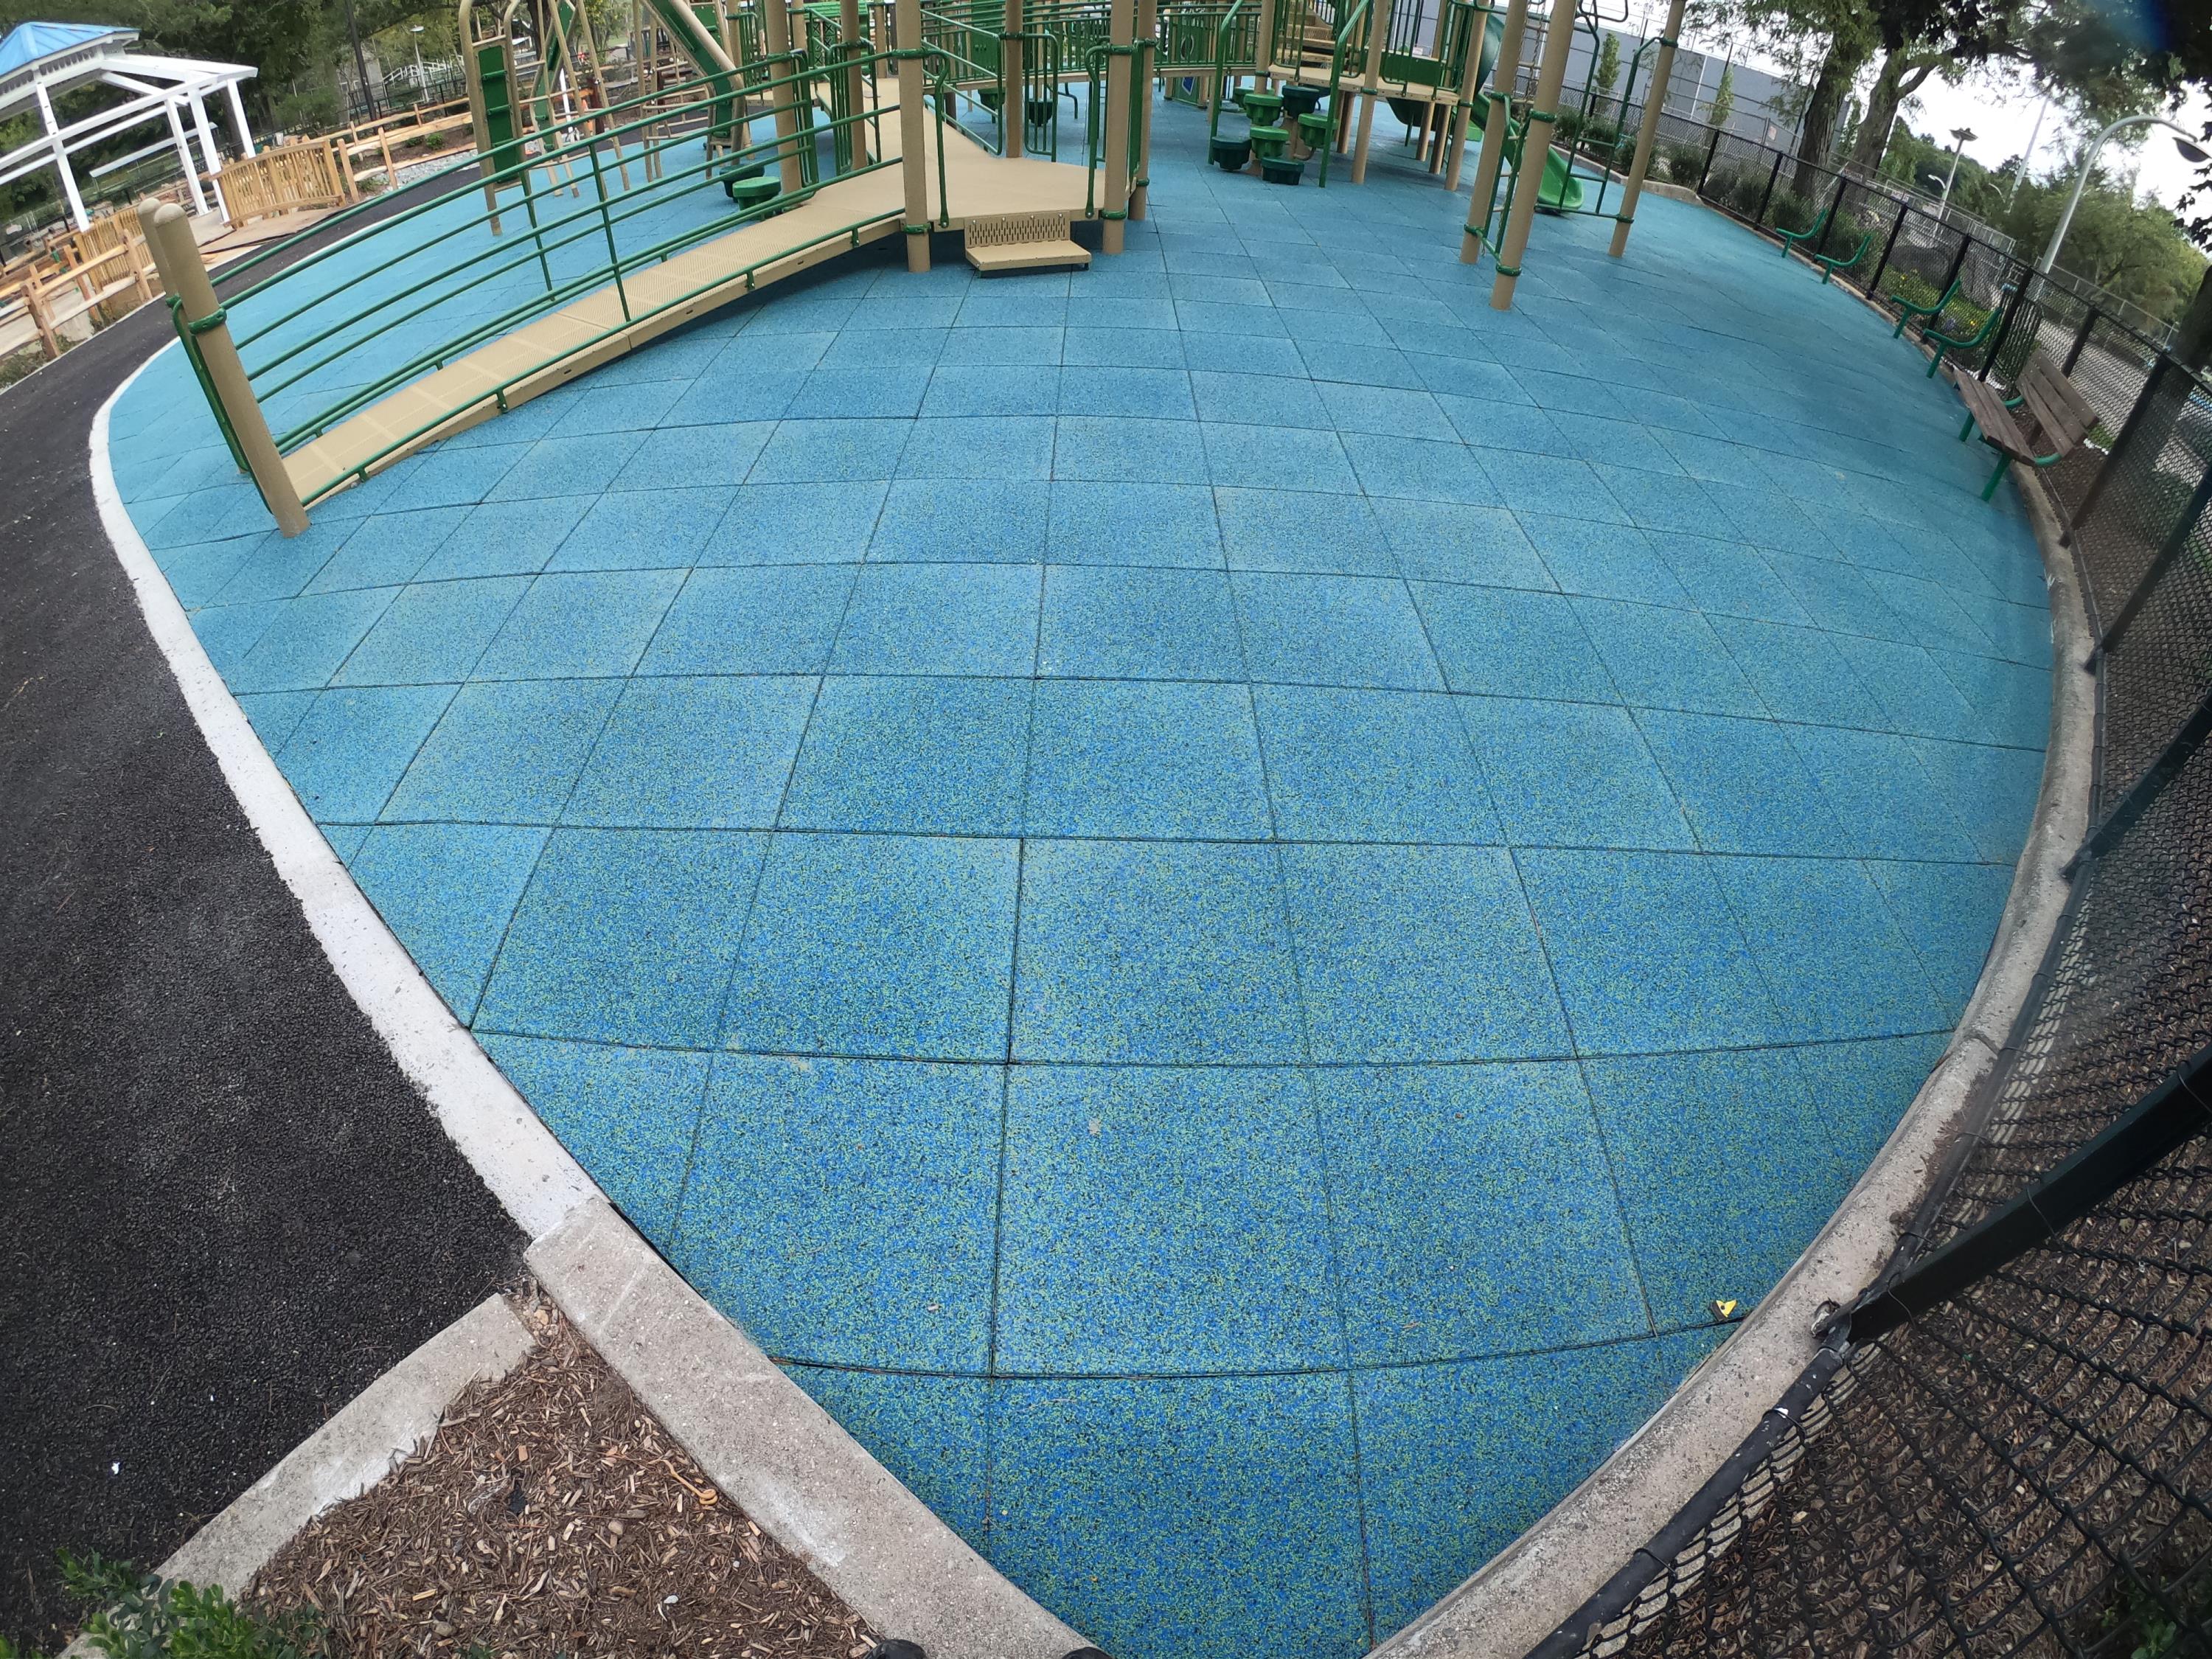 County Park Playground = Using TPV Top Tiles w50% Blue 45% Green 5% Black d